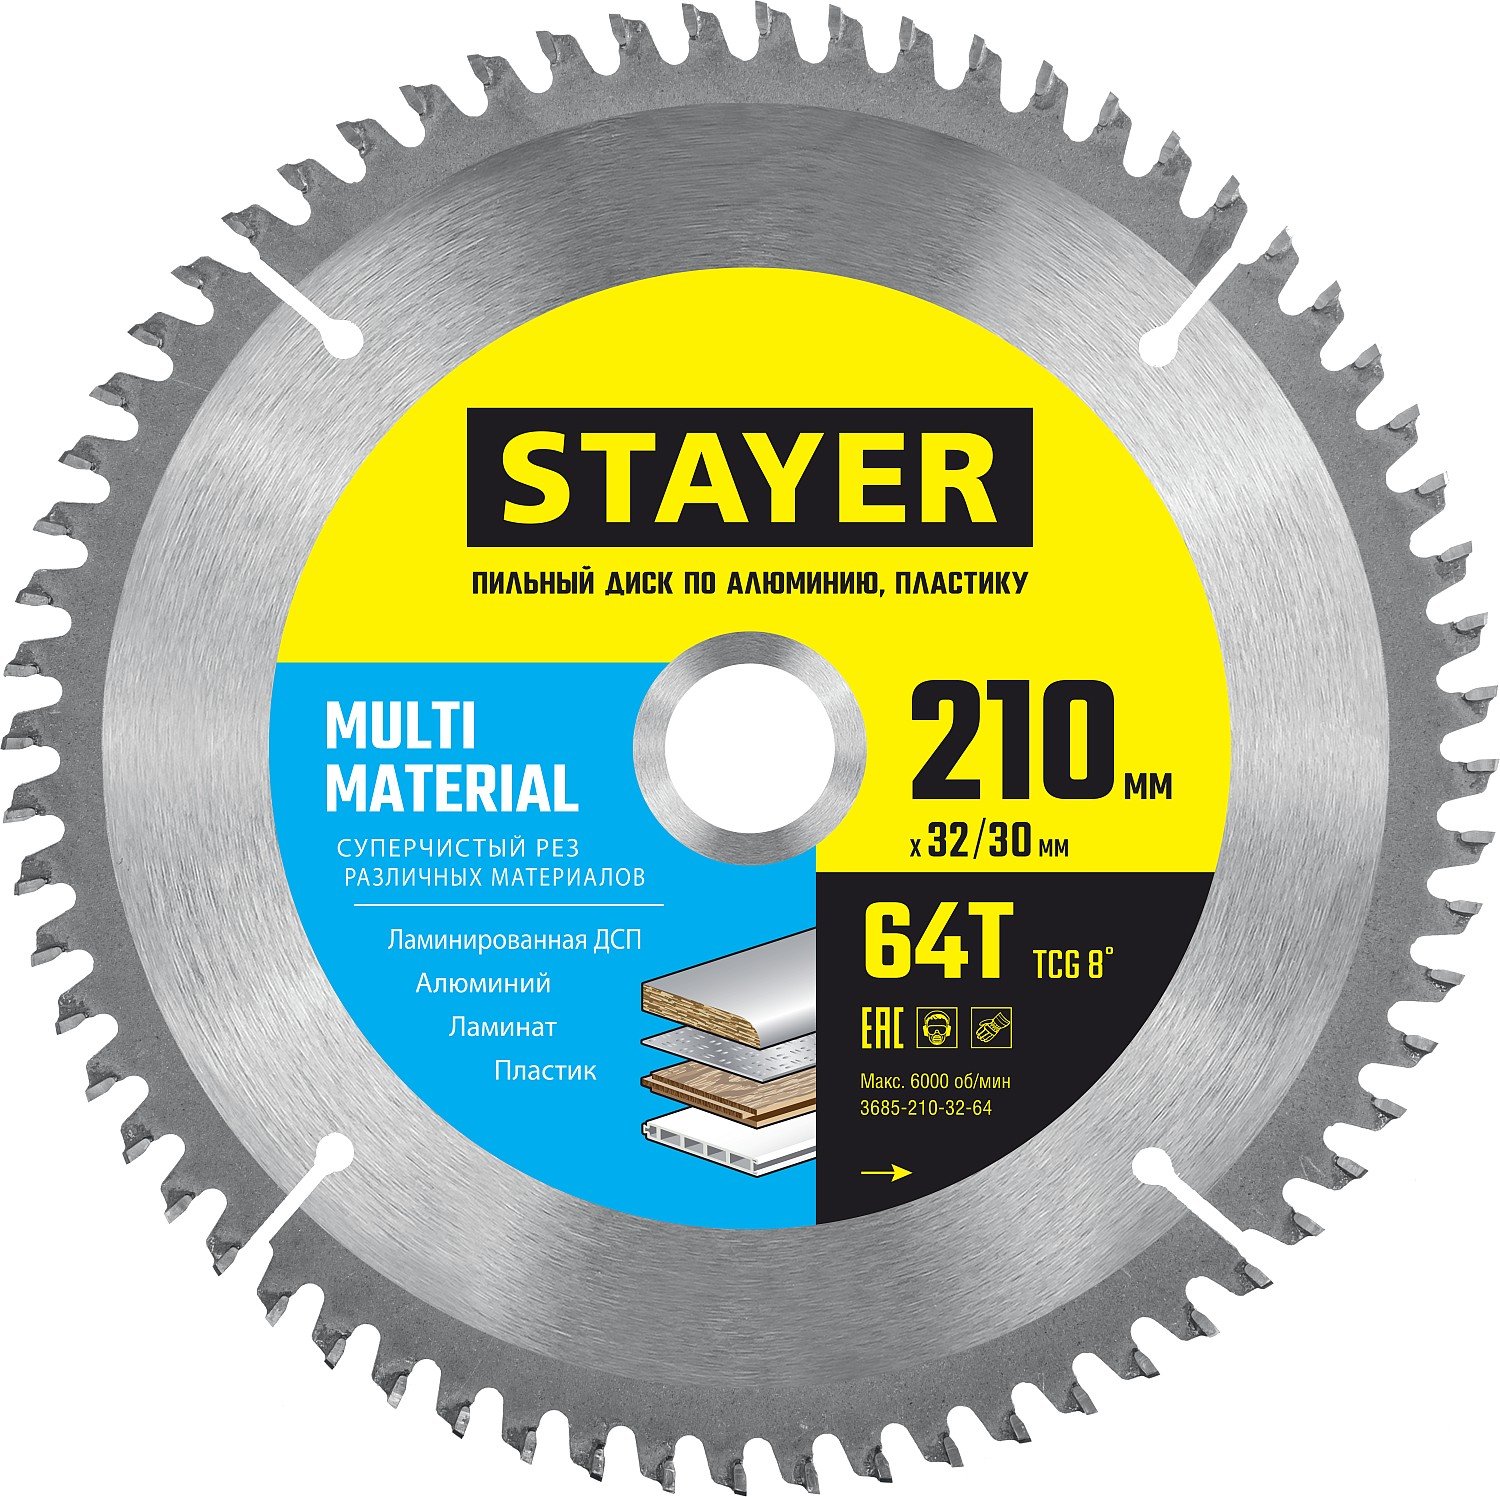 STAYER MULTI MATERIAL 21032 30 64,    ,    (3685-210-32-64)